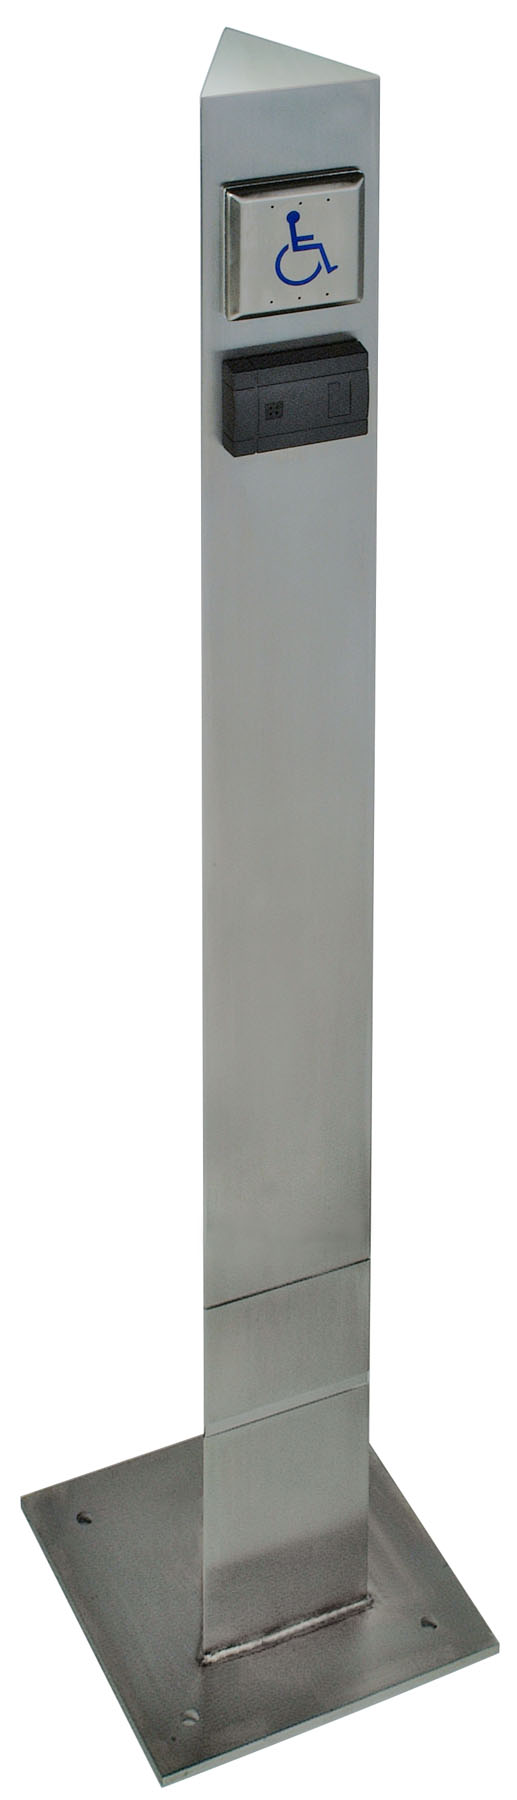 Bollard with square base plate and square push plate for automatic door